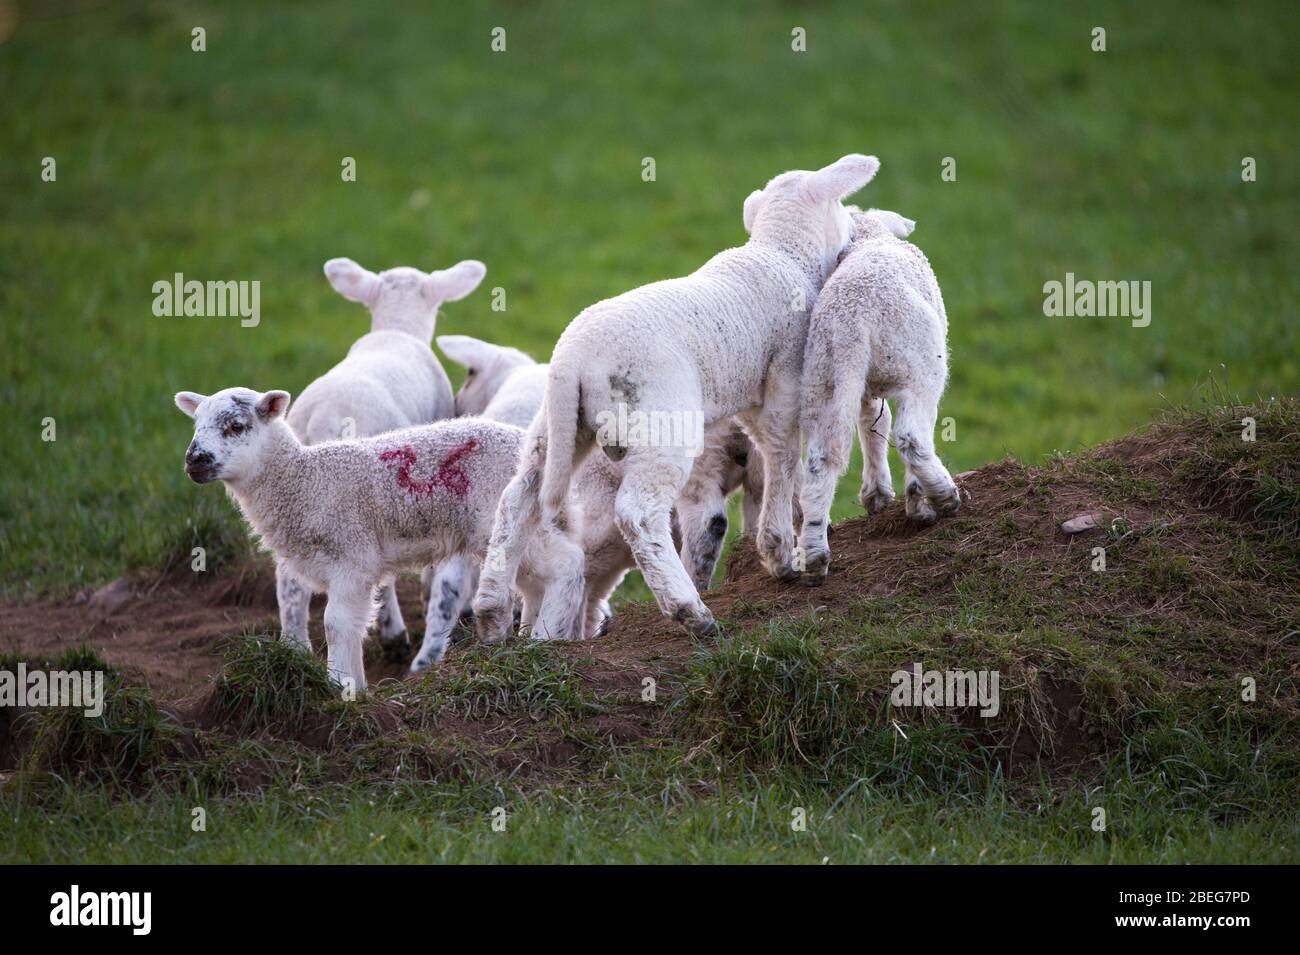 Doune, UK. 13th Apr, 2019. Pictured: Spring Lambs play in the late evening light on Bank Holiday Easter Monday. The Coronavirus (COVID-19) lockdown has been in place for almost 3 weeks allowing the expectant mother ewes to give birth in relative peace. The tiny lambs play and jump in the fields and suckle for milk from their mothers. Credit: Colin Fisher/Alamy Live News Stock Photo